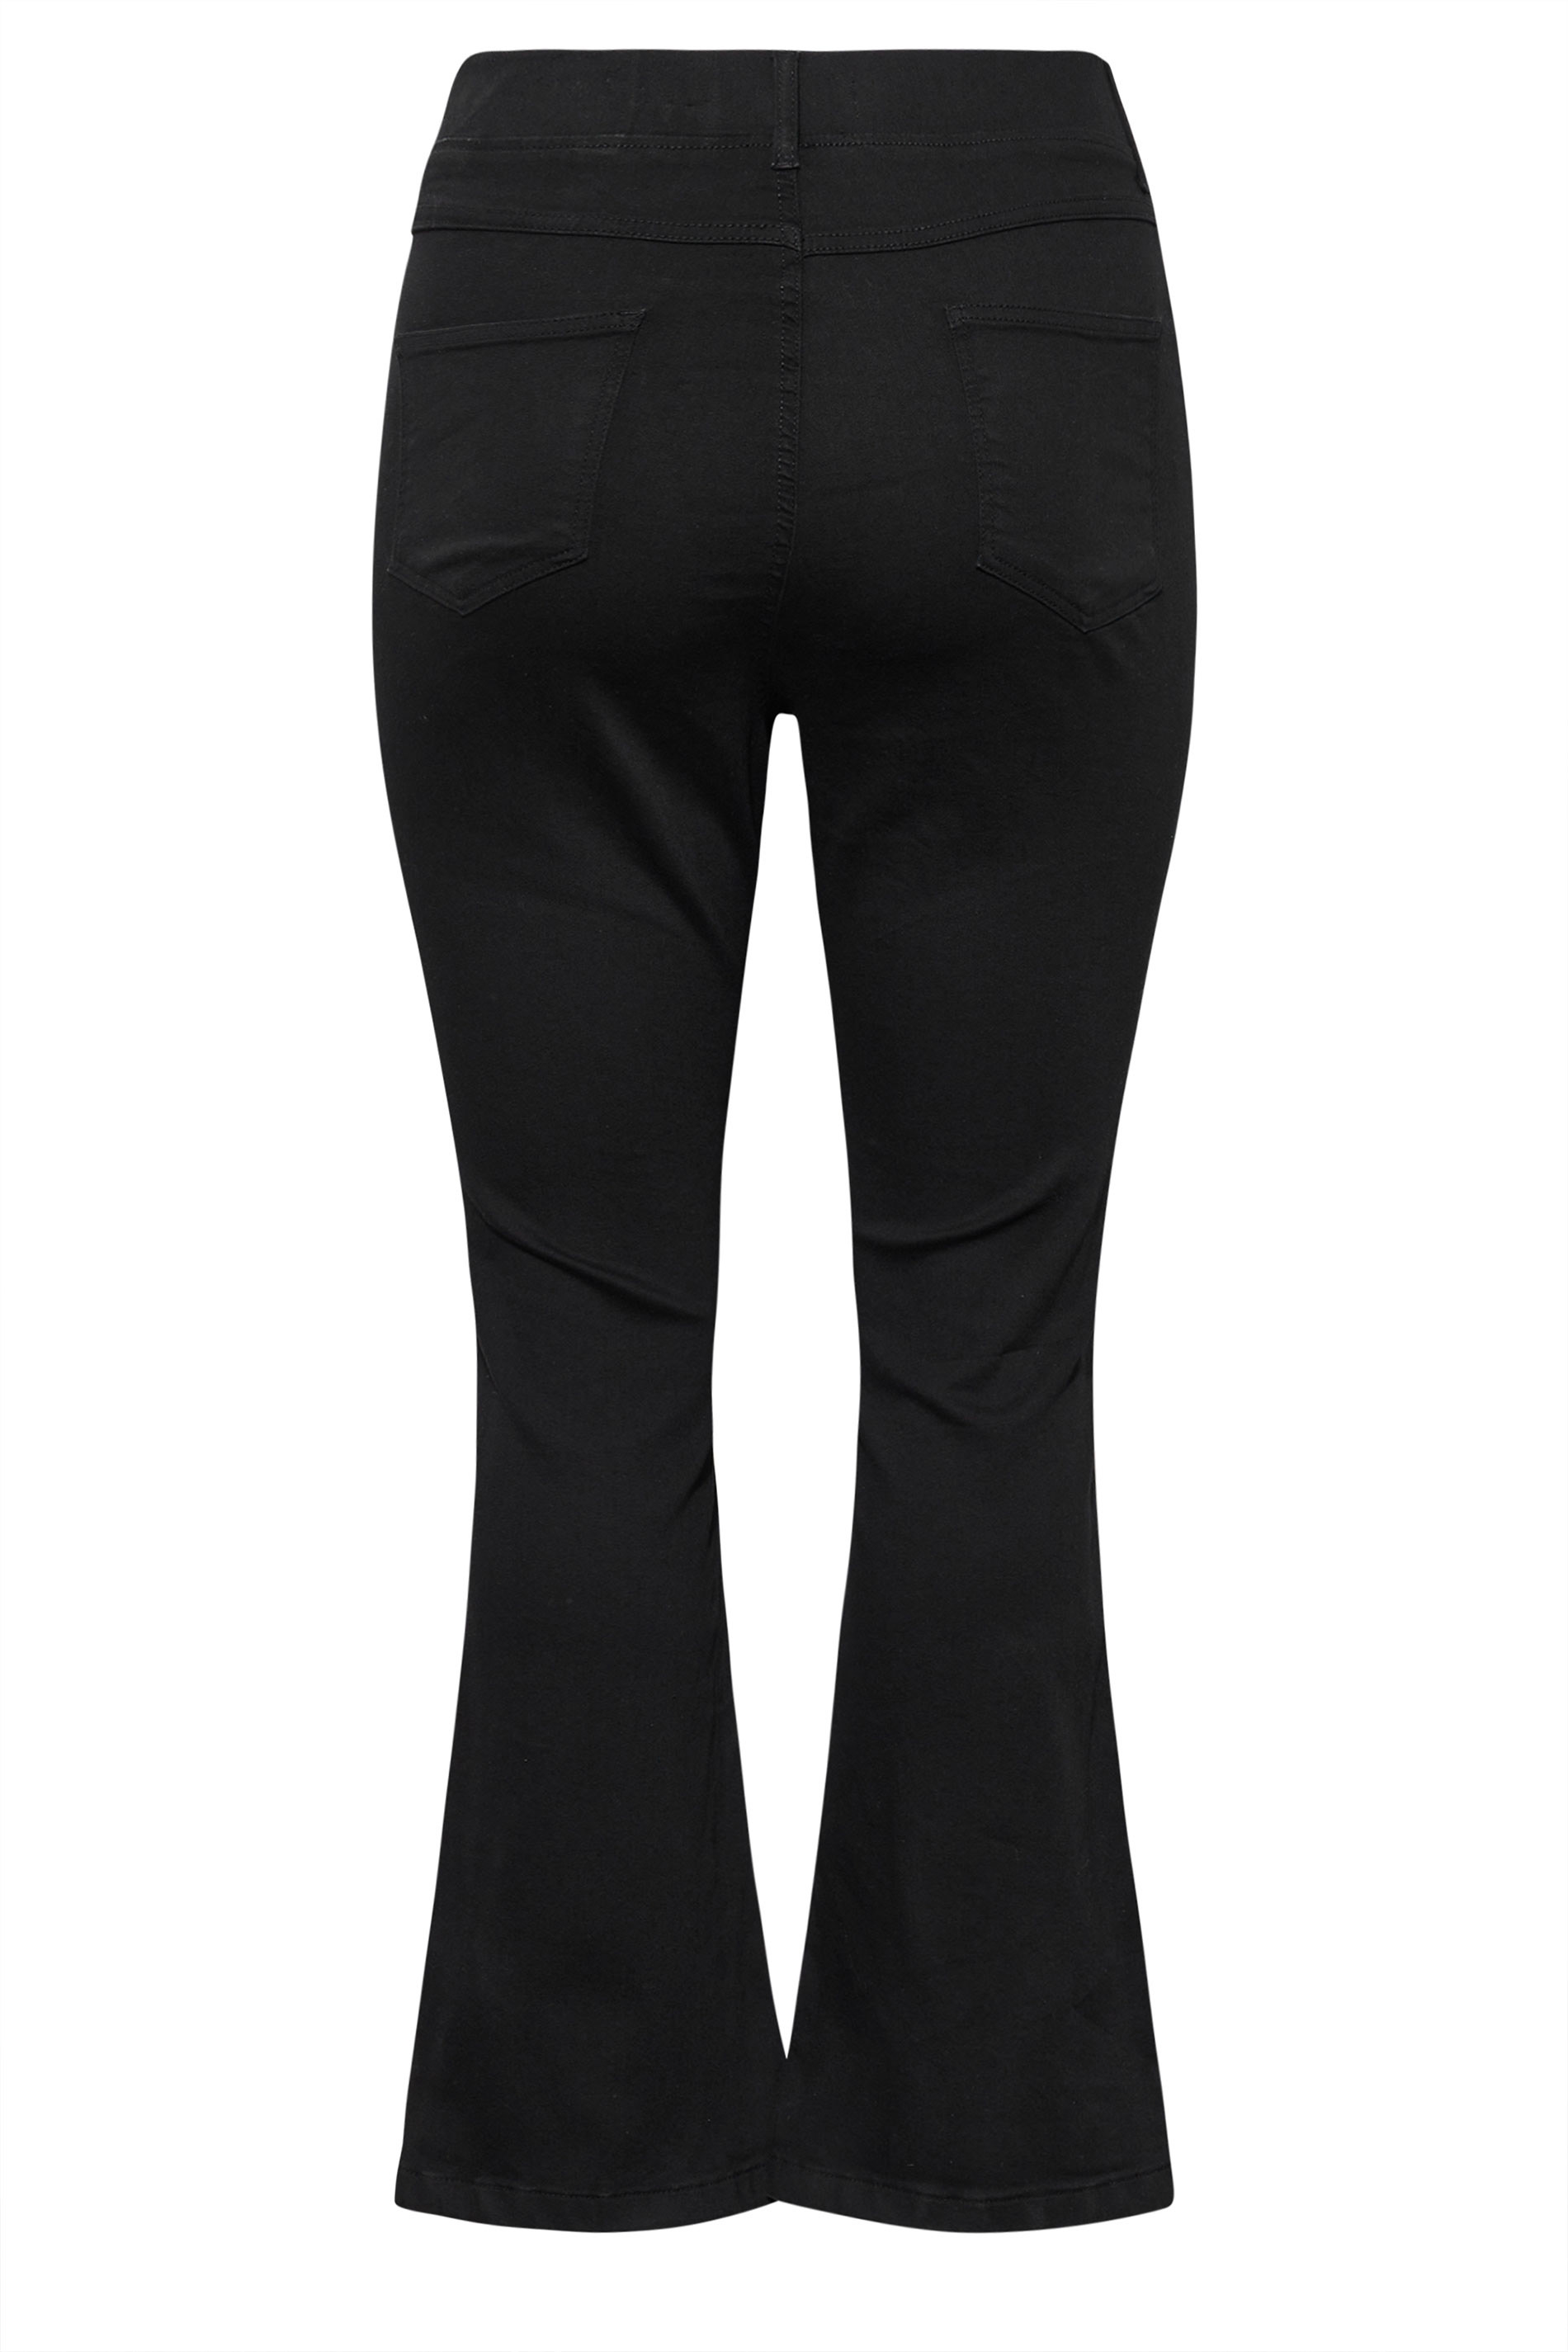 Plus Size Black Pull-On HANNAH Bootcut Jeggings